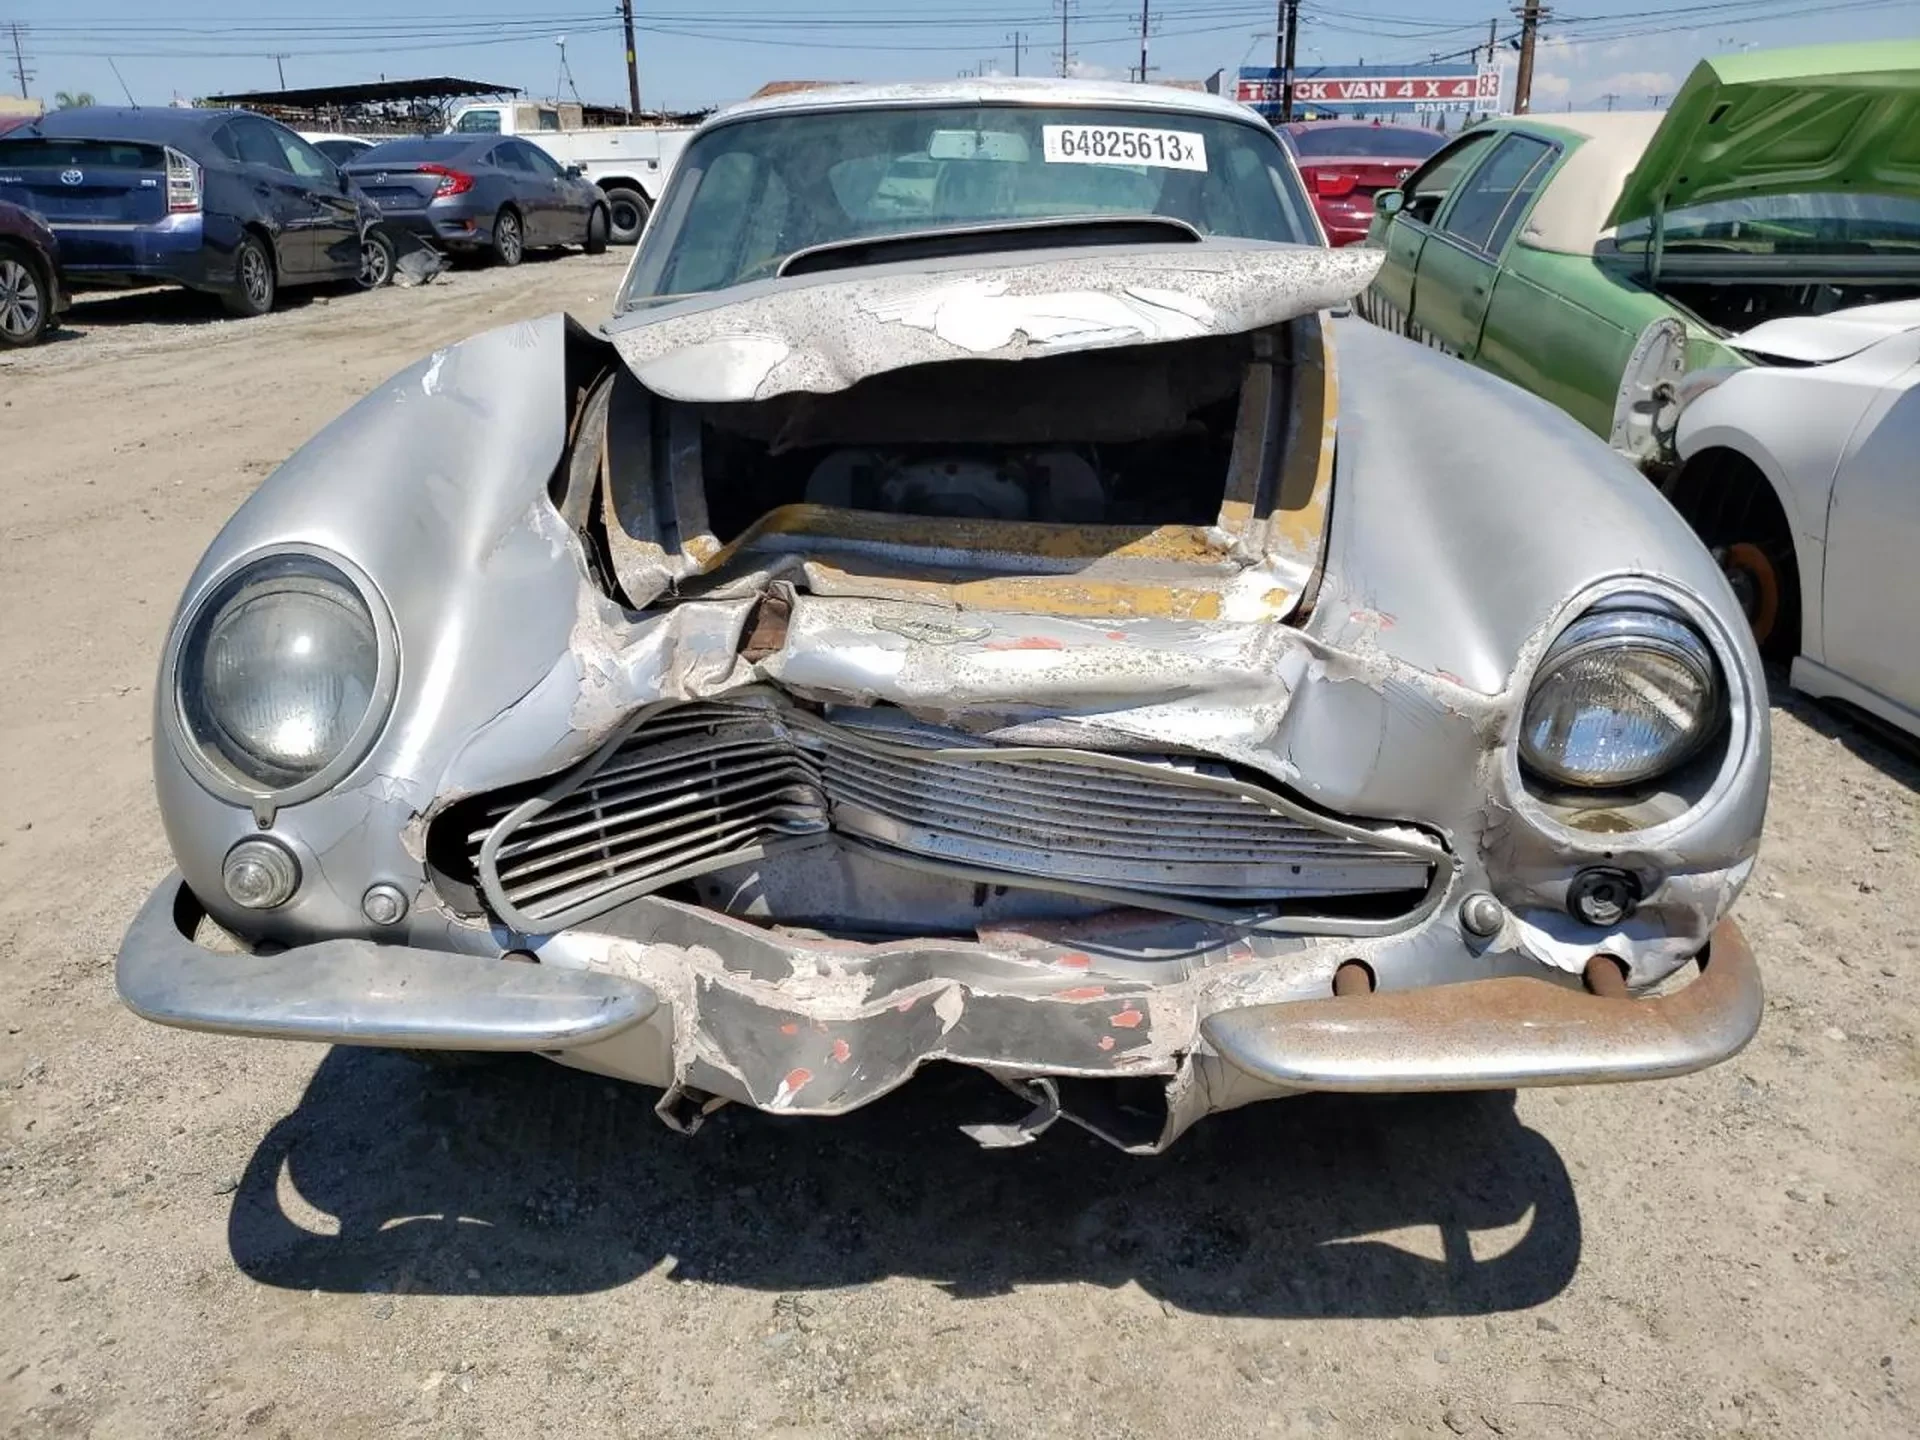 Is This Wrecked Junkyard Aston Martin DB6 that Sold for $66k the Deal of a Lifetime?